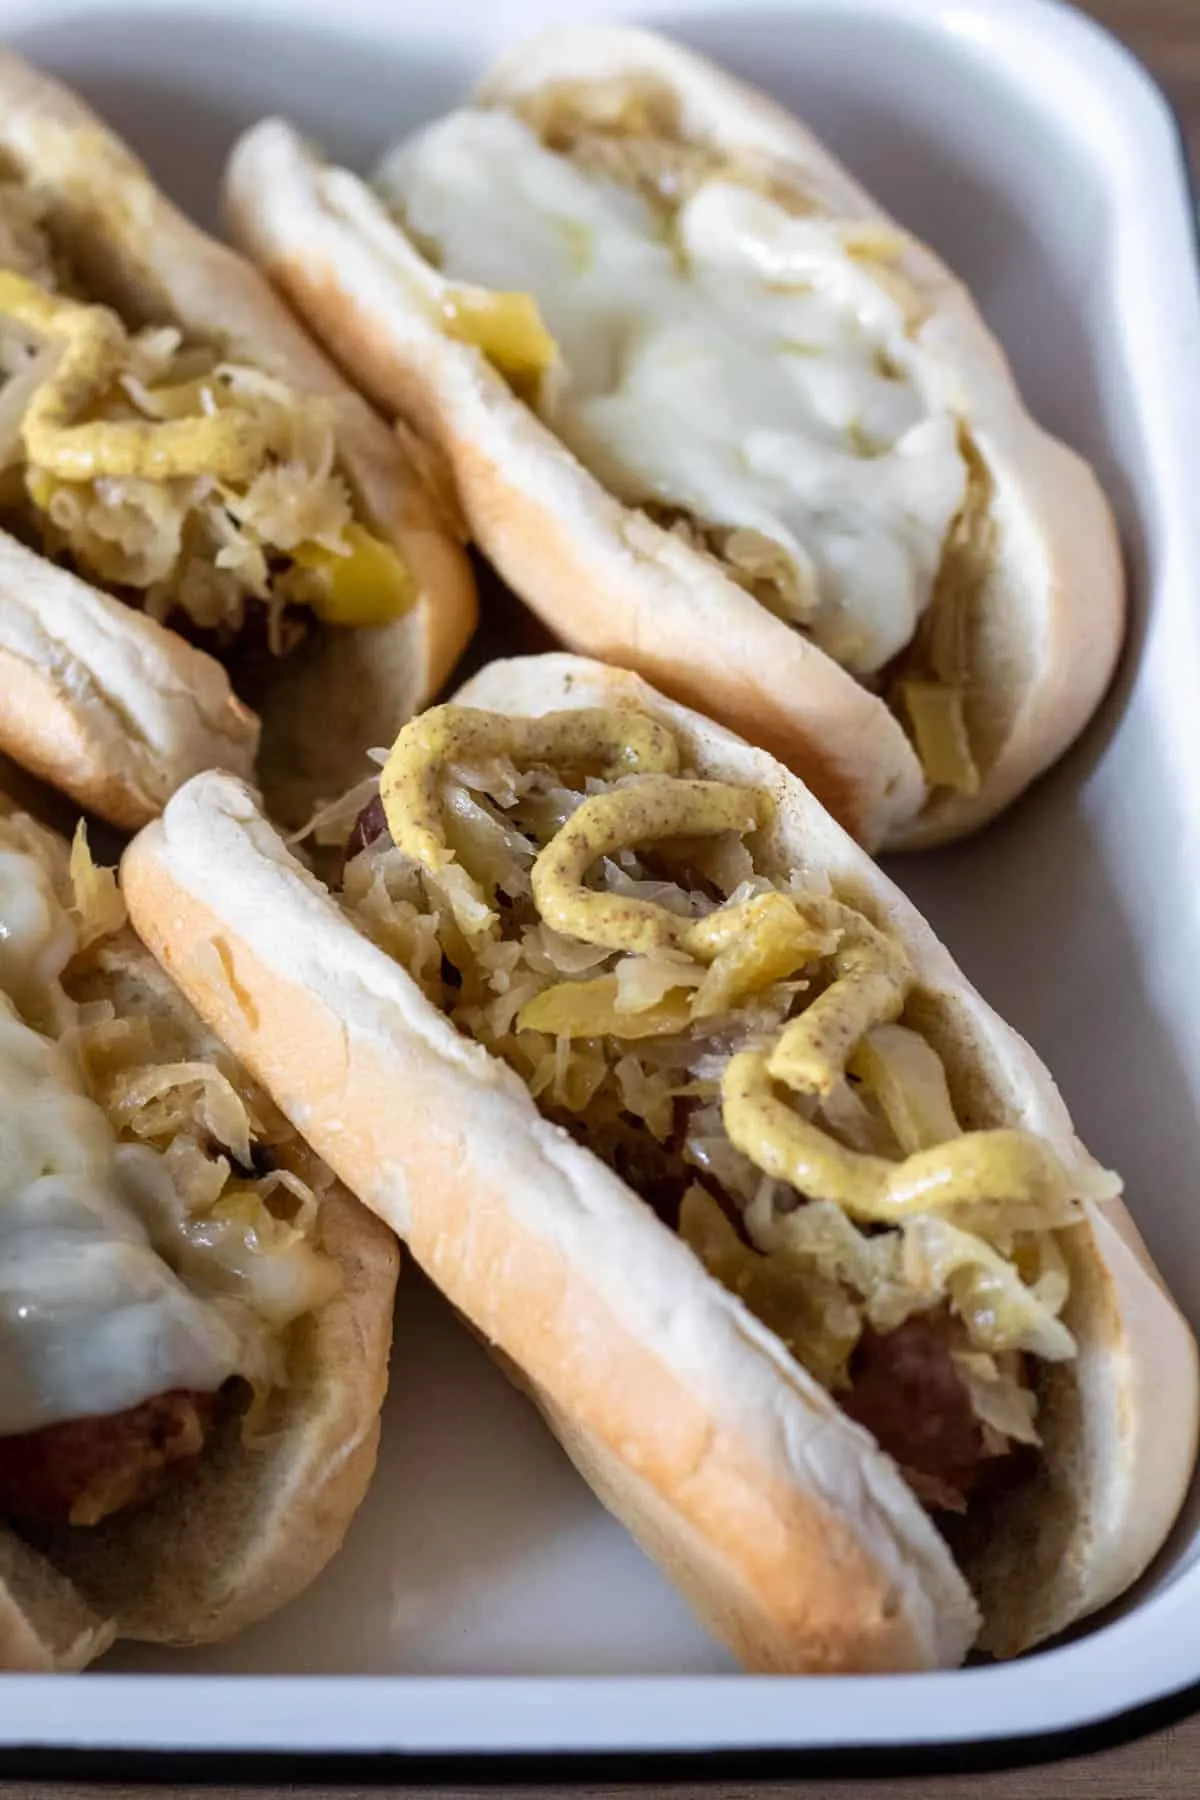 Closup of brats on buns with mustard and melted cheese.